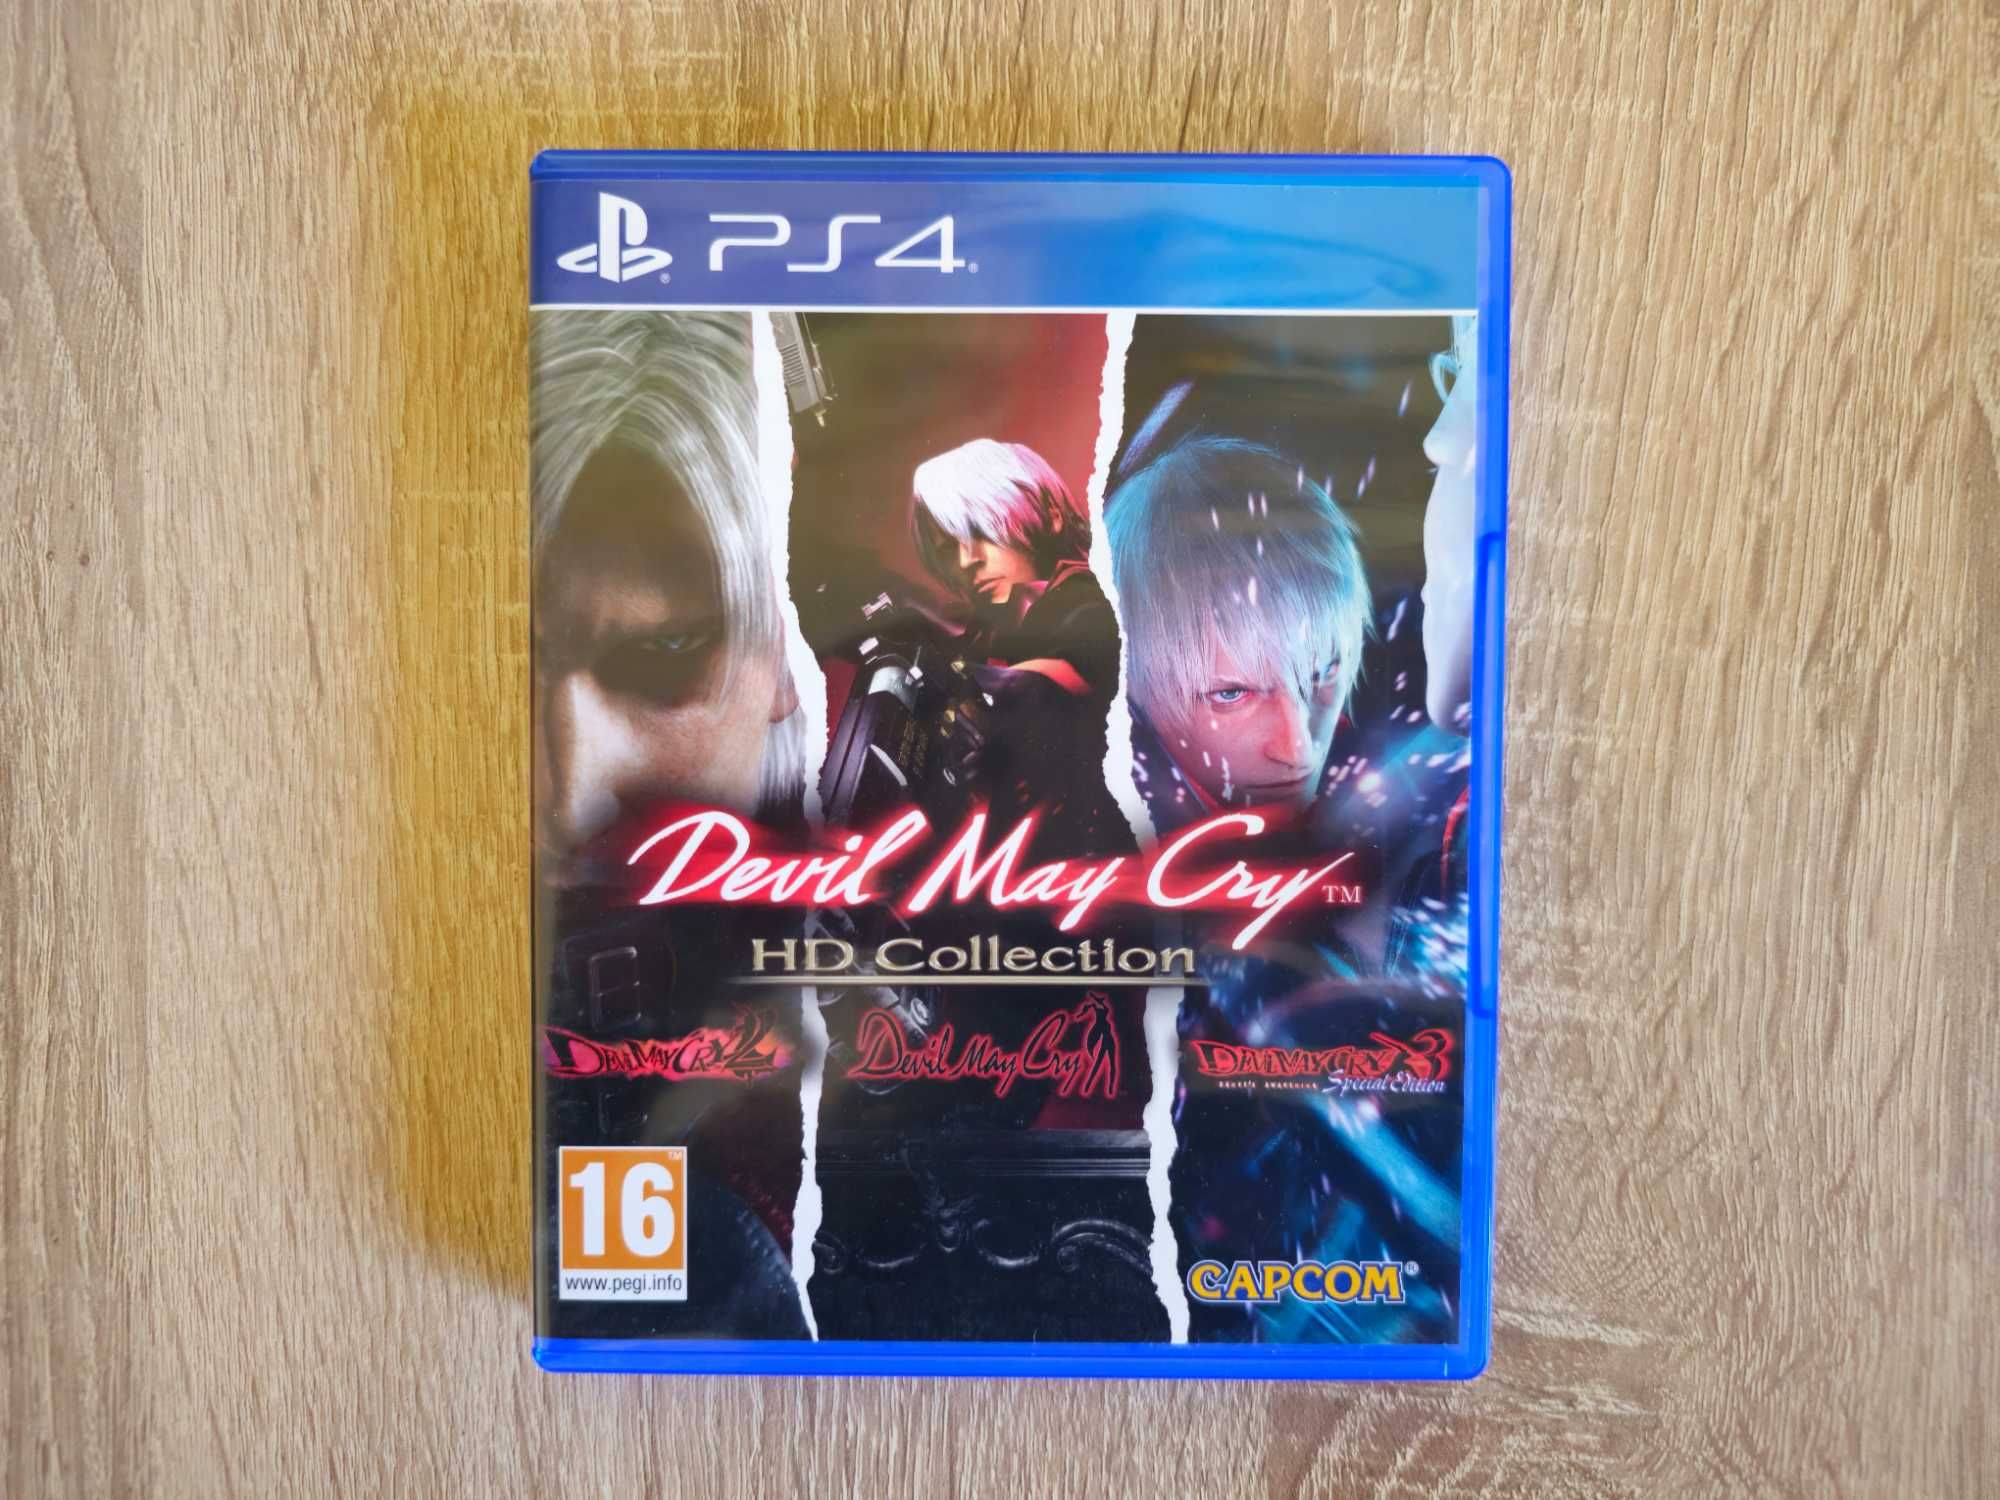 DMC Devil May Cry HD Collection/Trilogy за PlayStation 4 PS4 ПС4